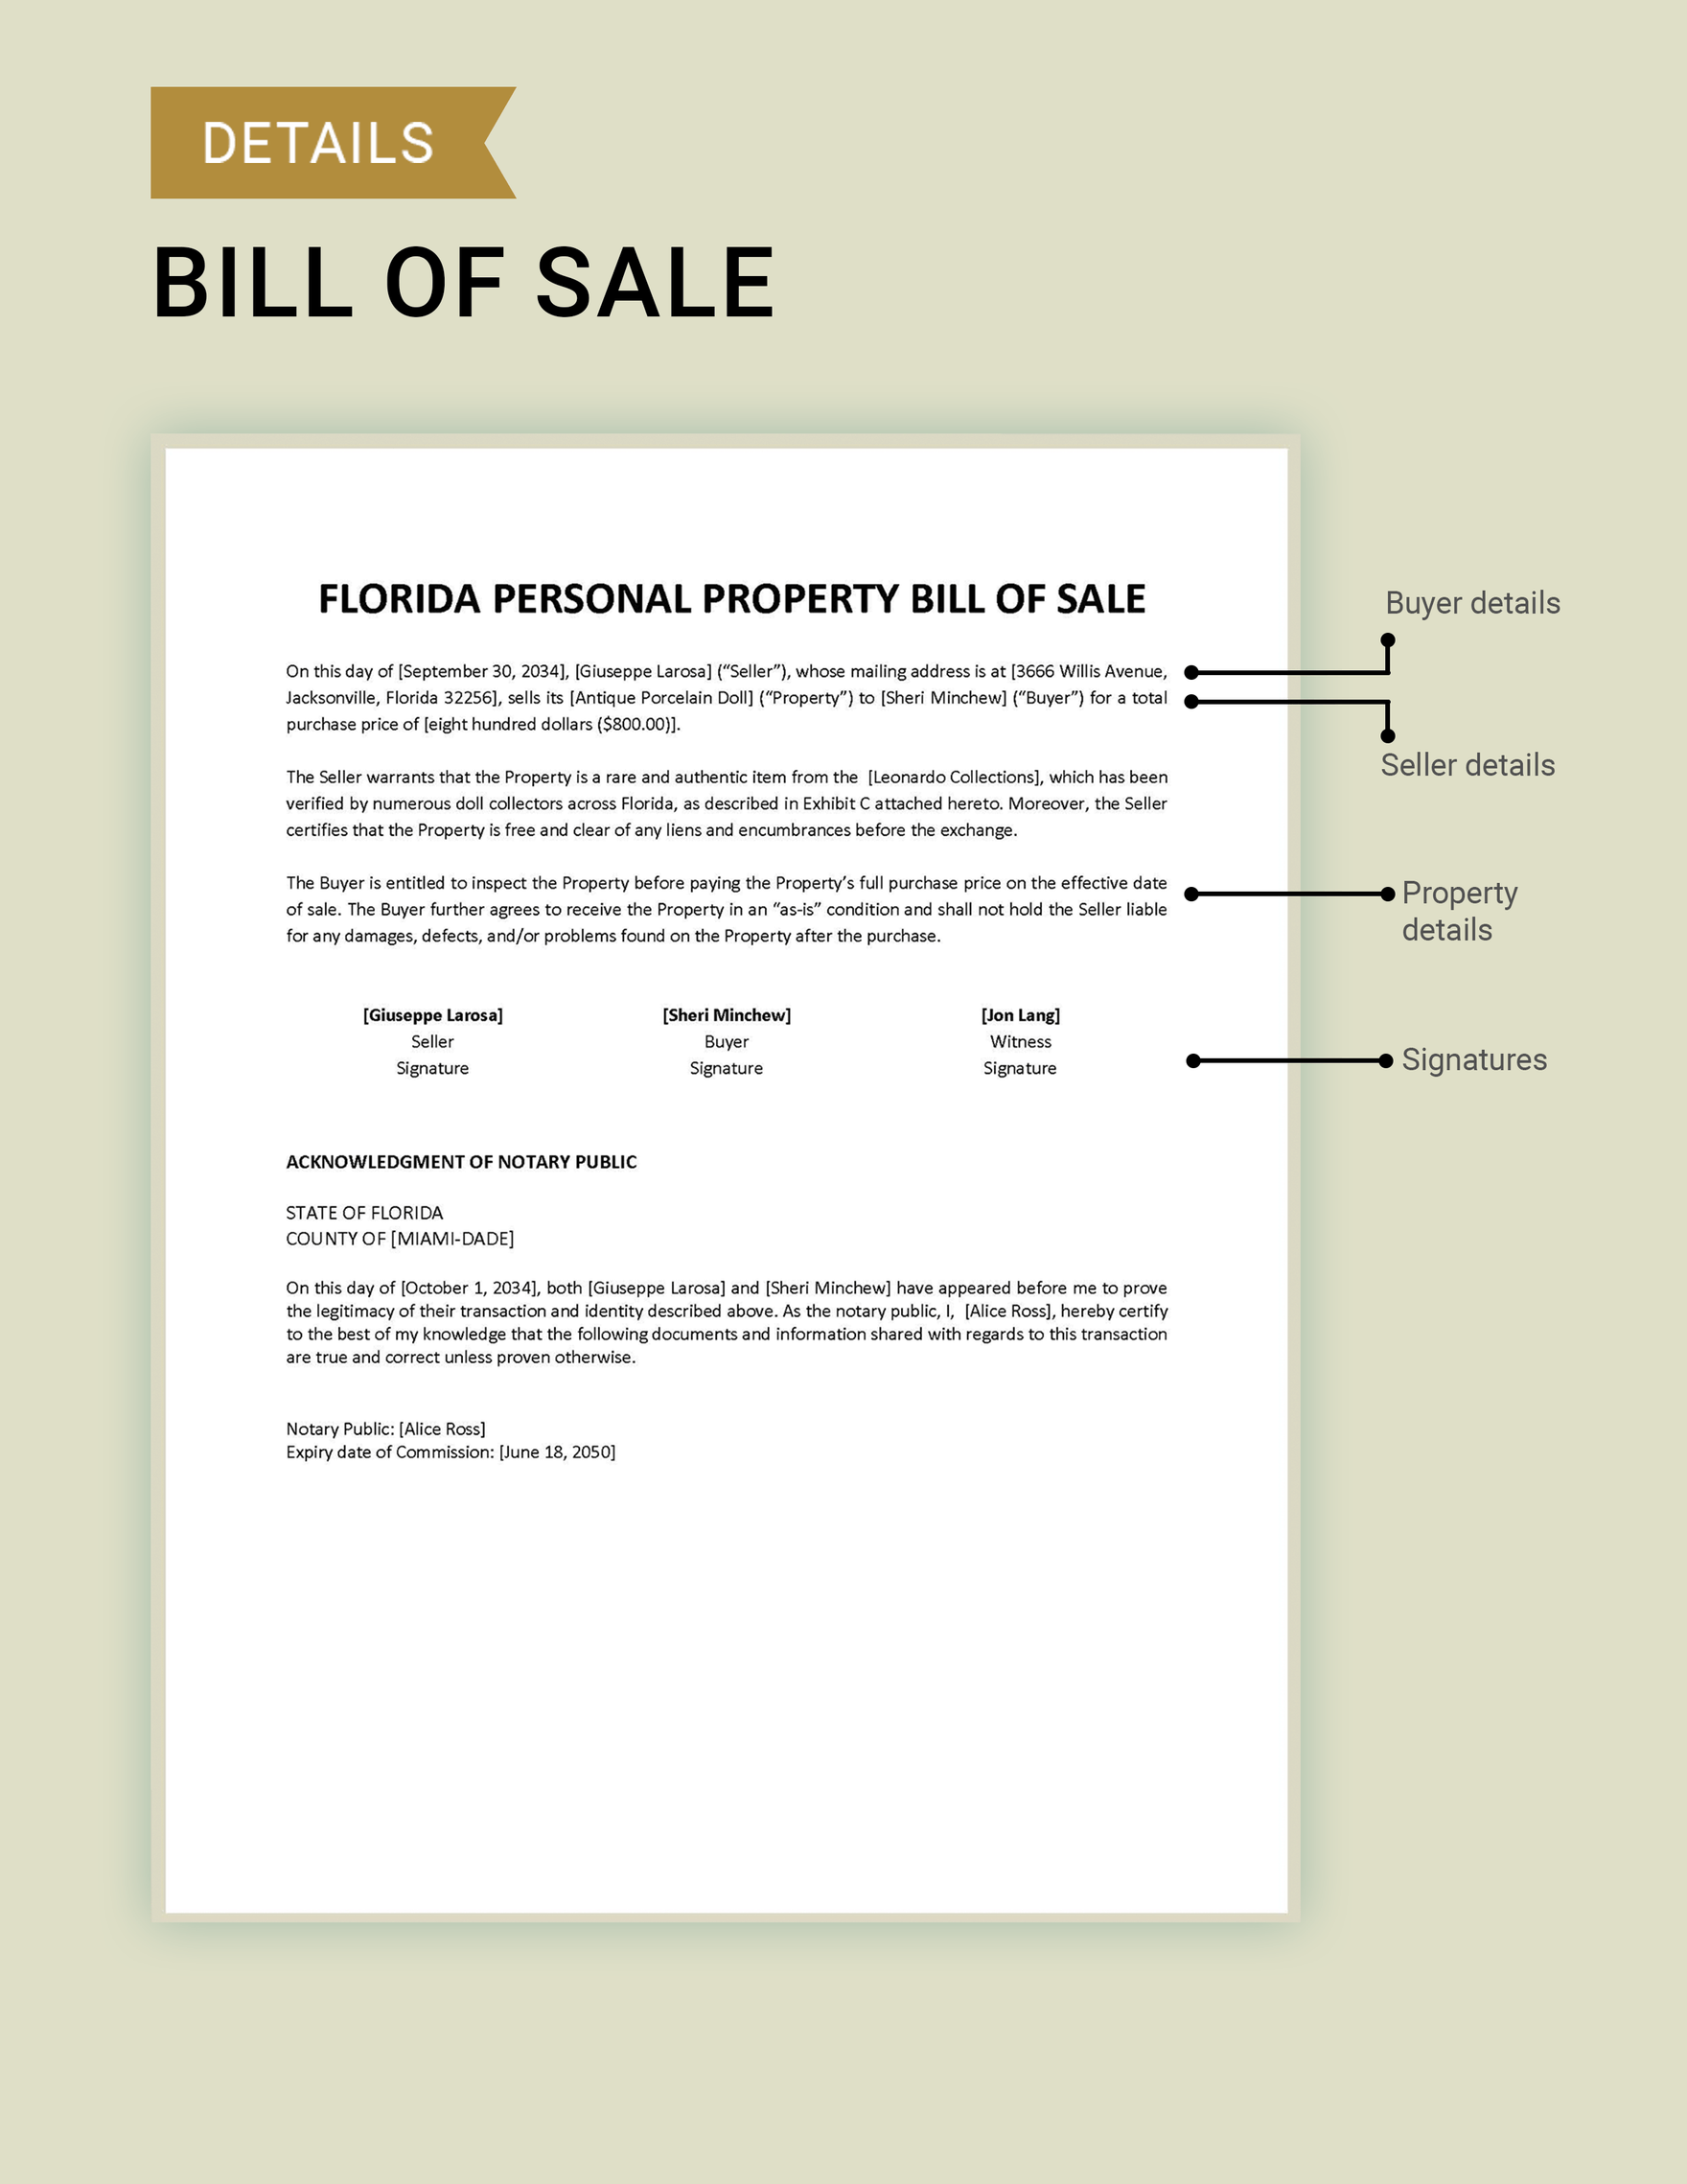 Florida Personal Property Bill of Sale Template